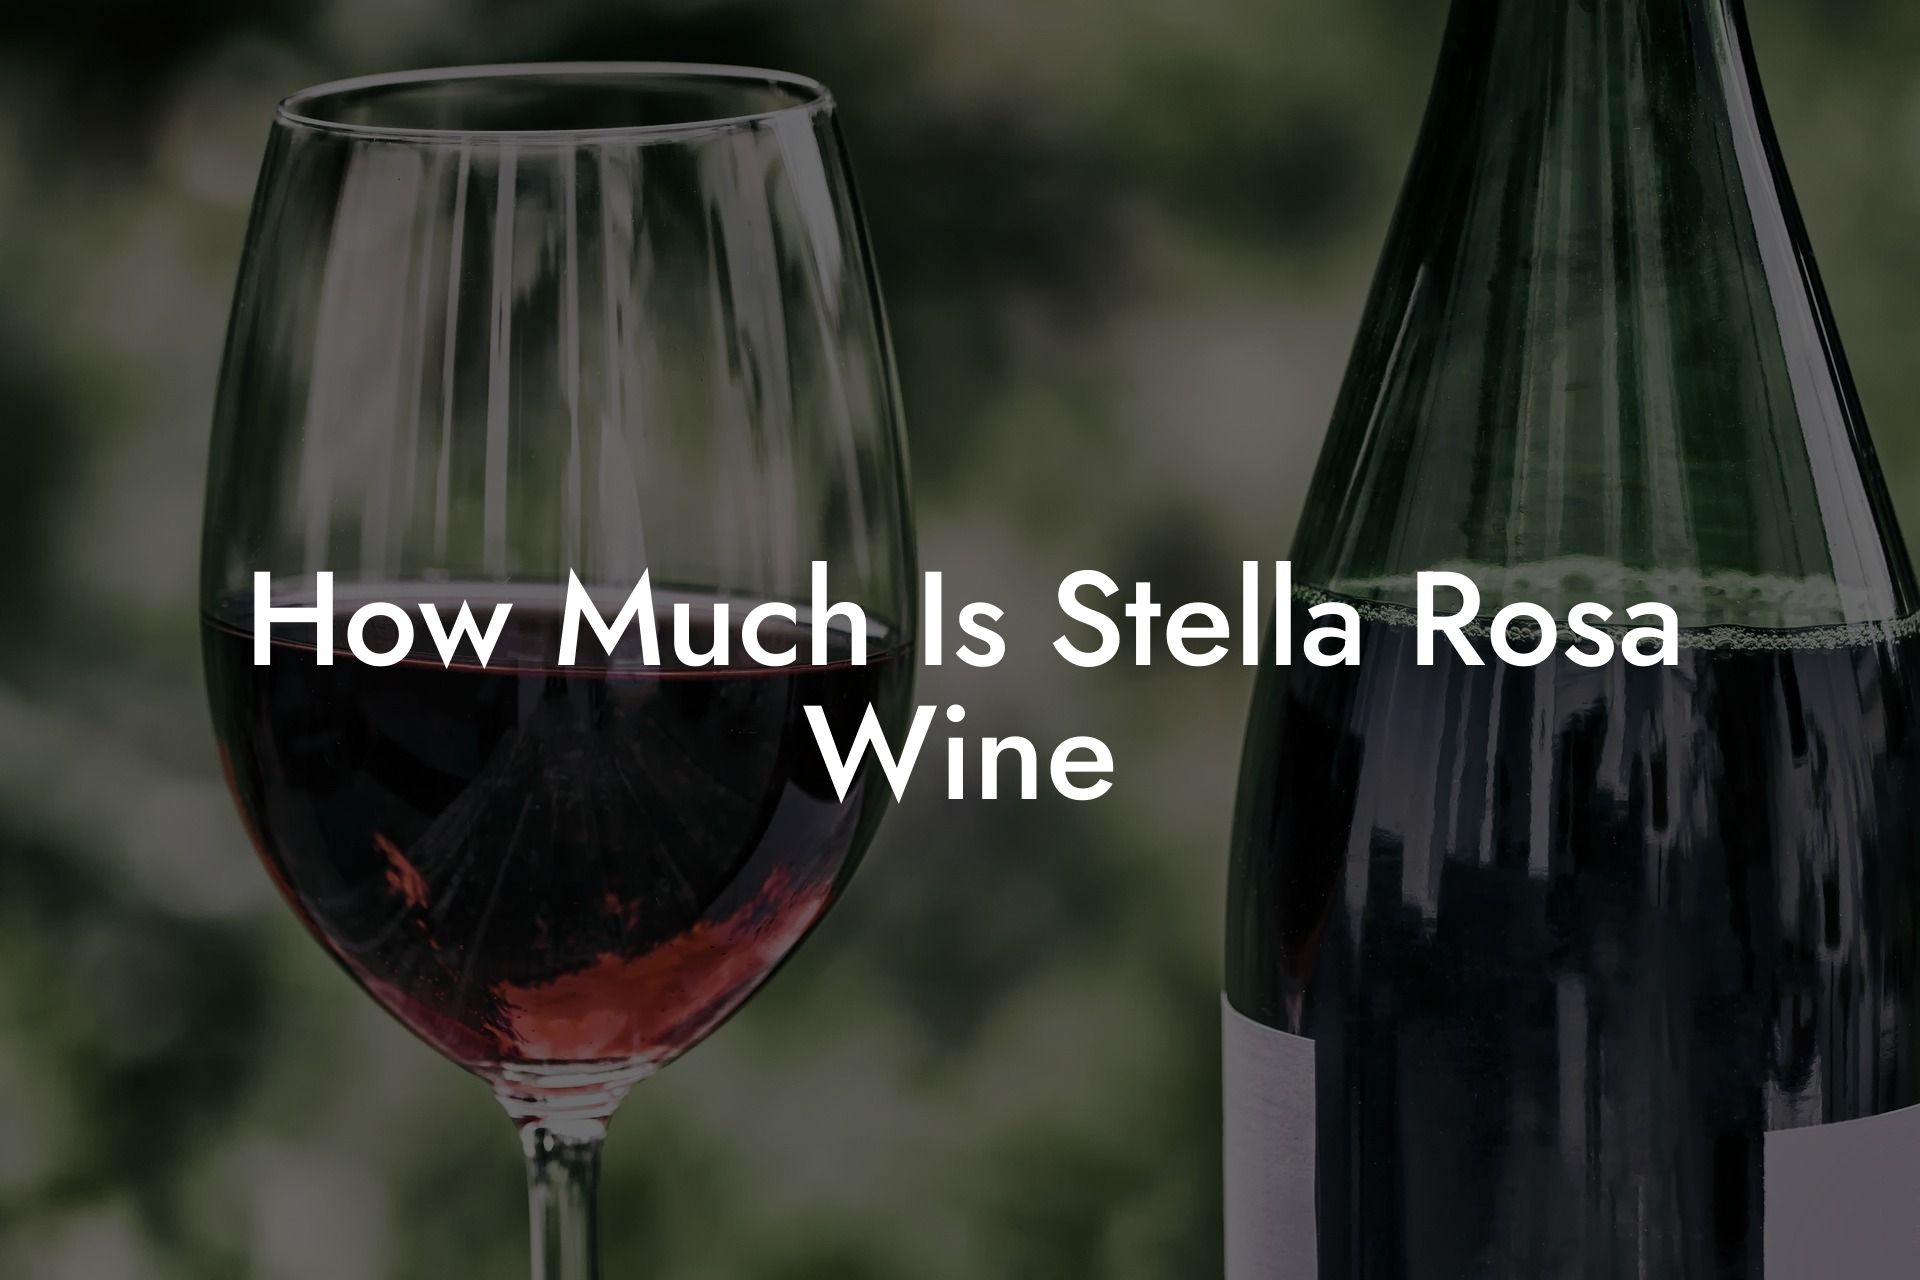 How Much Is Stella Rosa Wine